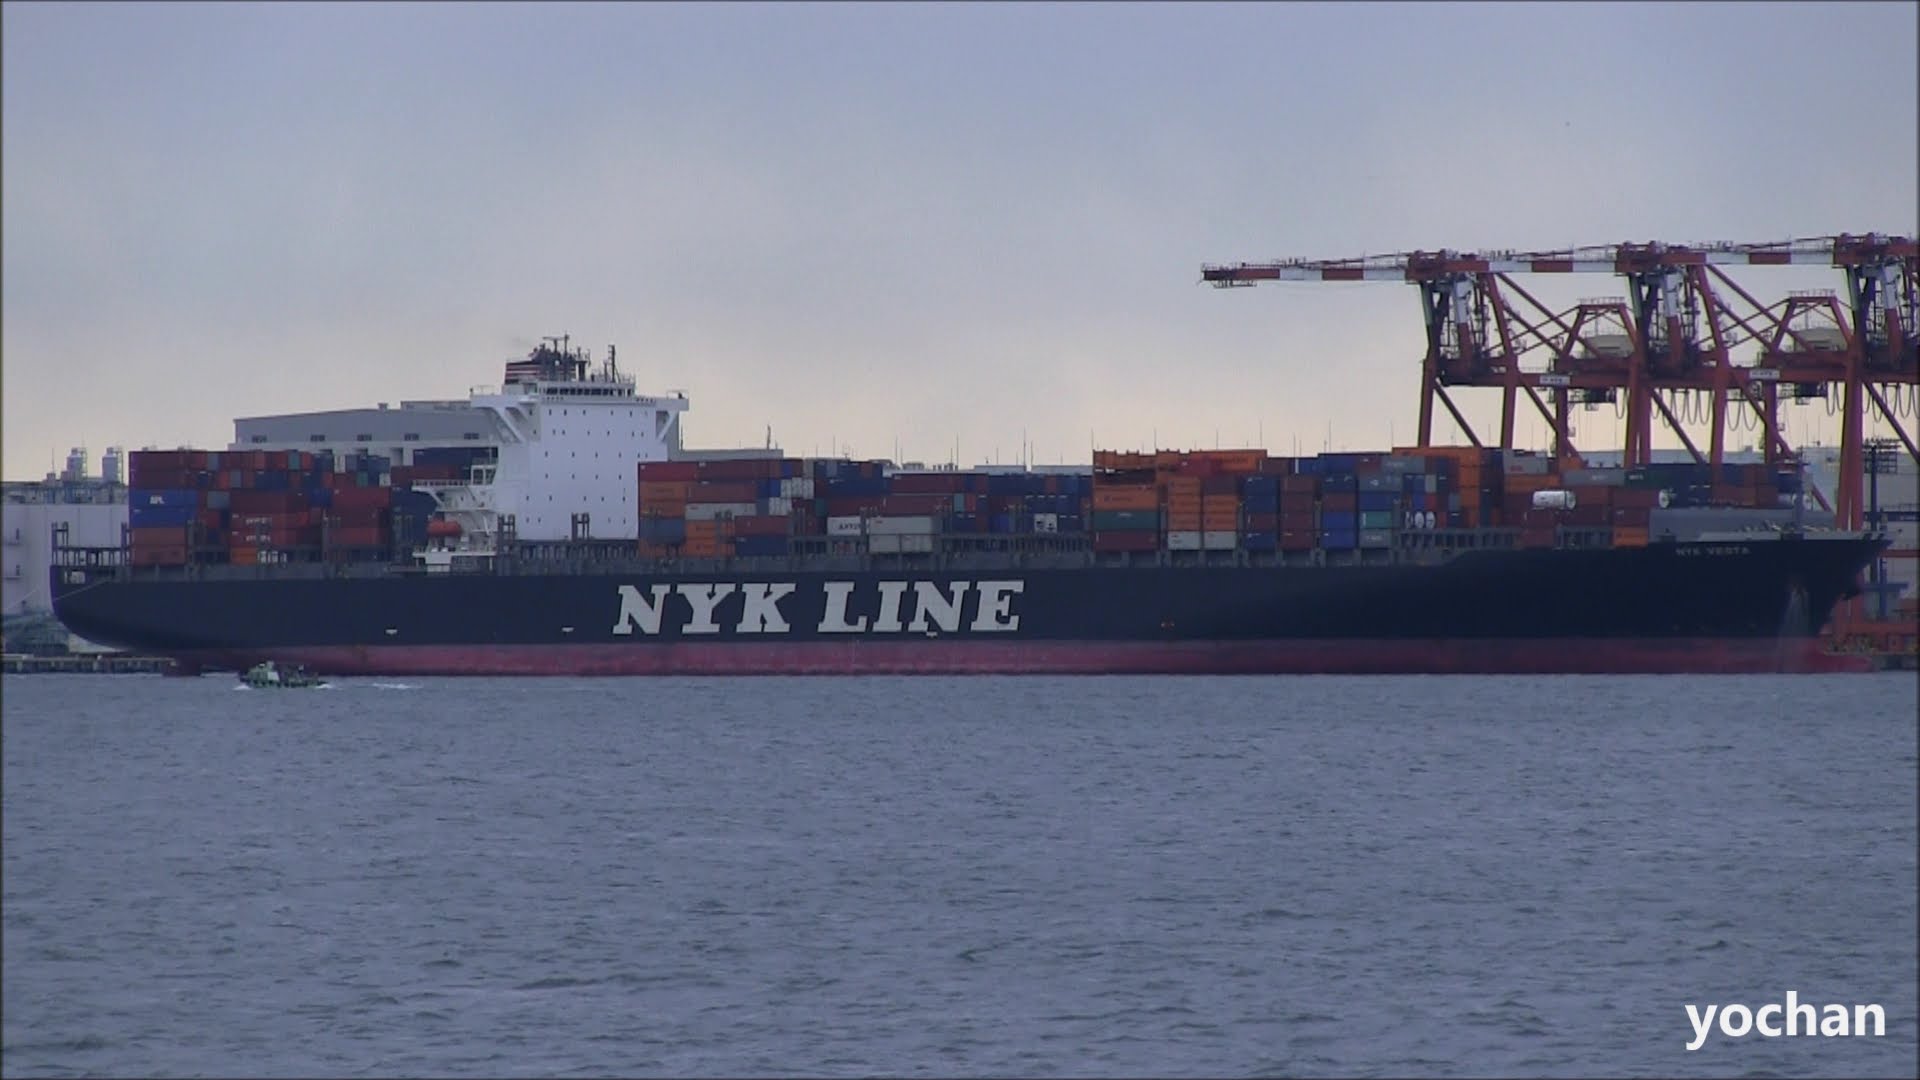 2019: NYK intends to test autonomous container ship in the Pacific ocean